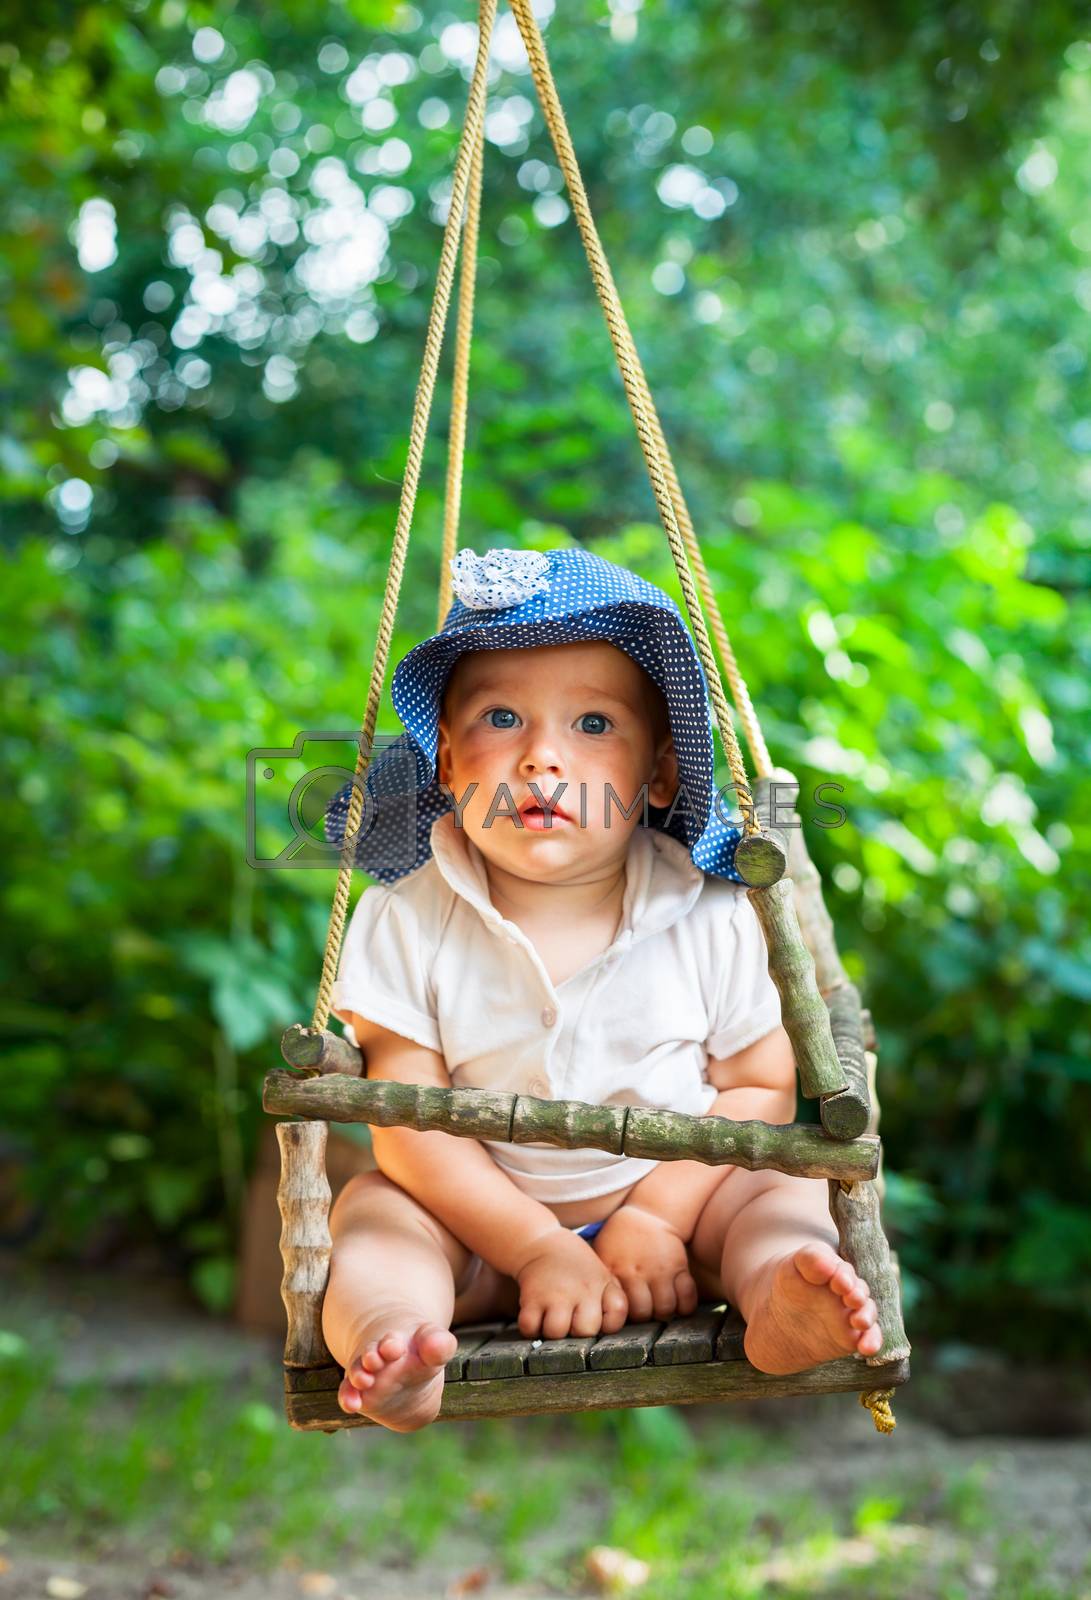 Royalty free image of Infant on a swing by naumoid